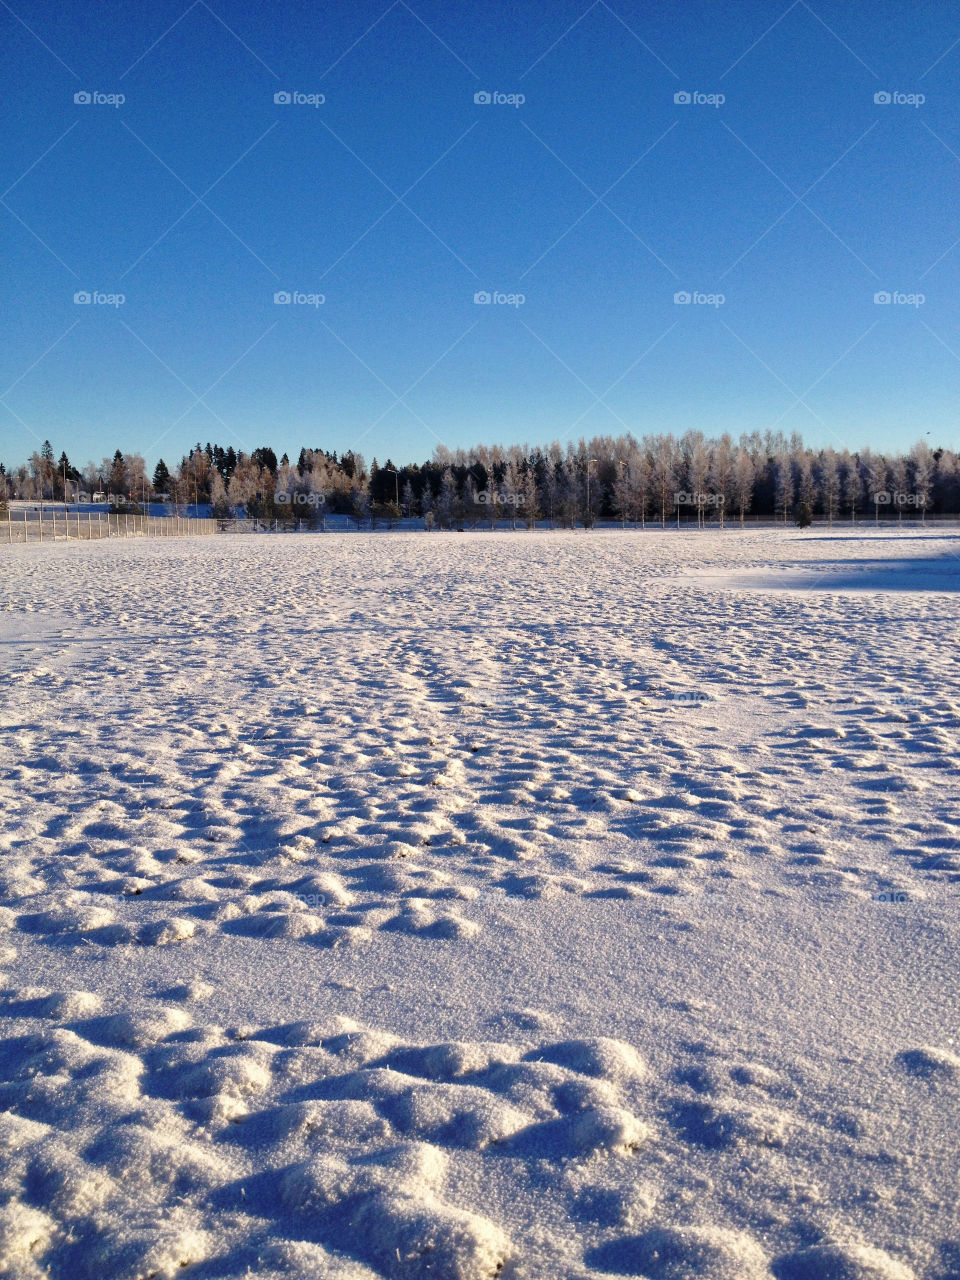 White space. A field covered with snow